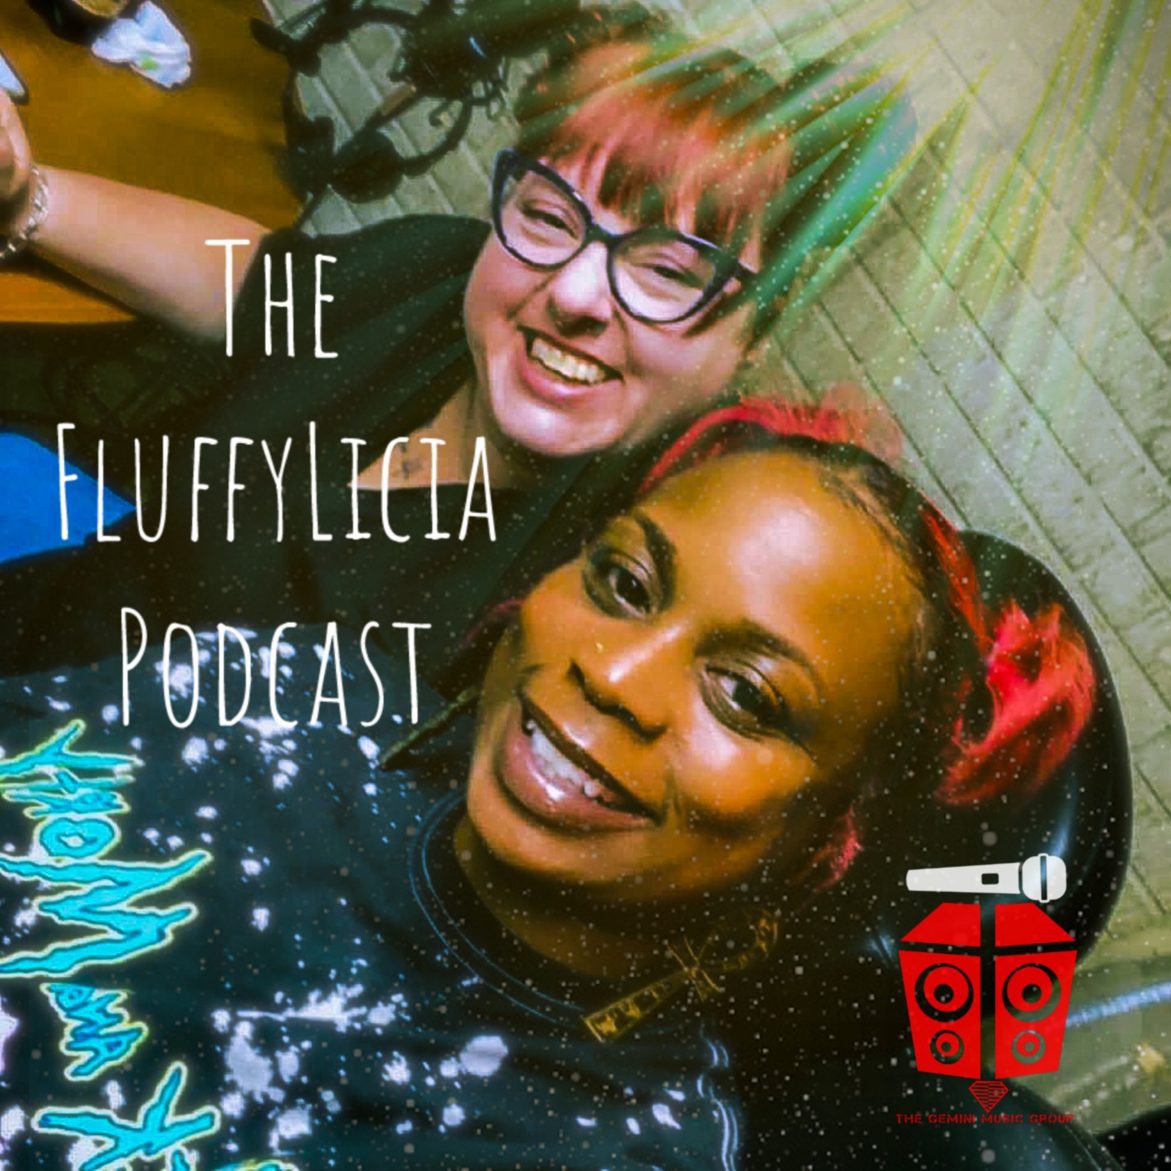 Black Podcasting - The FluffyLicia Podcast S2EP16 - Comment Soldiers"